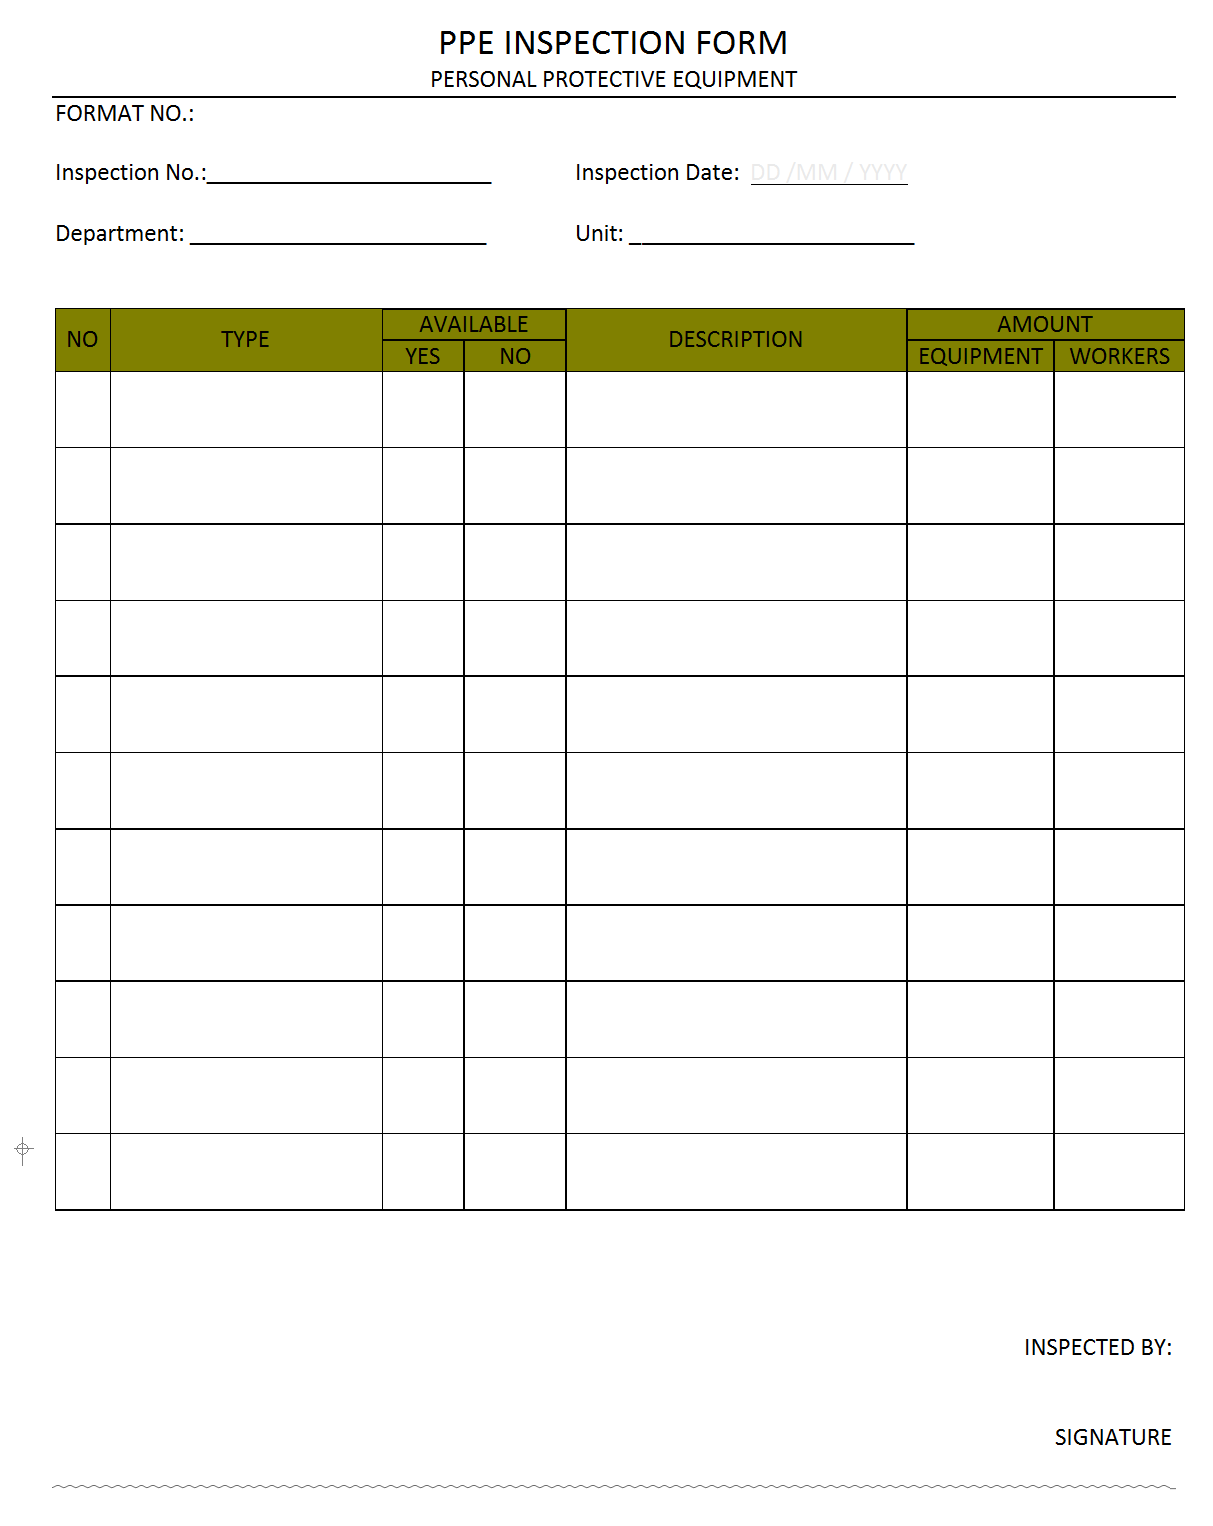 PPE Inspection form - For Equipment Inspection Checklist Template For Equipment Inspection Checklist Template